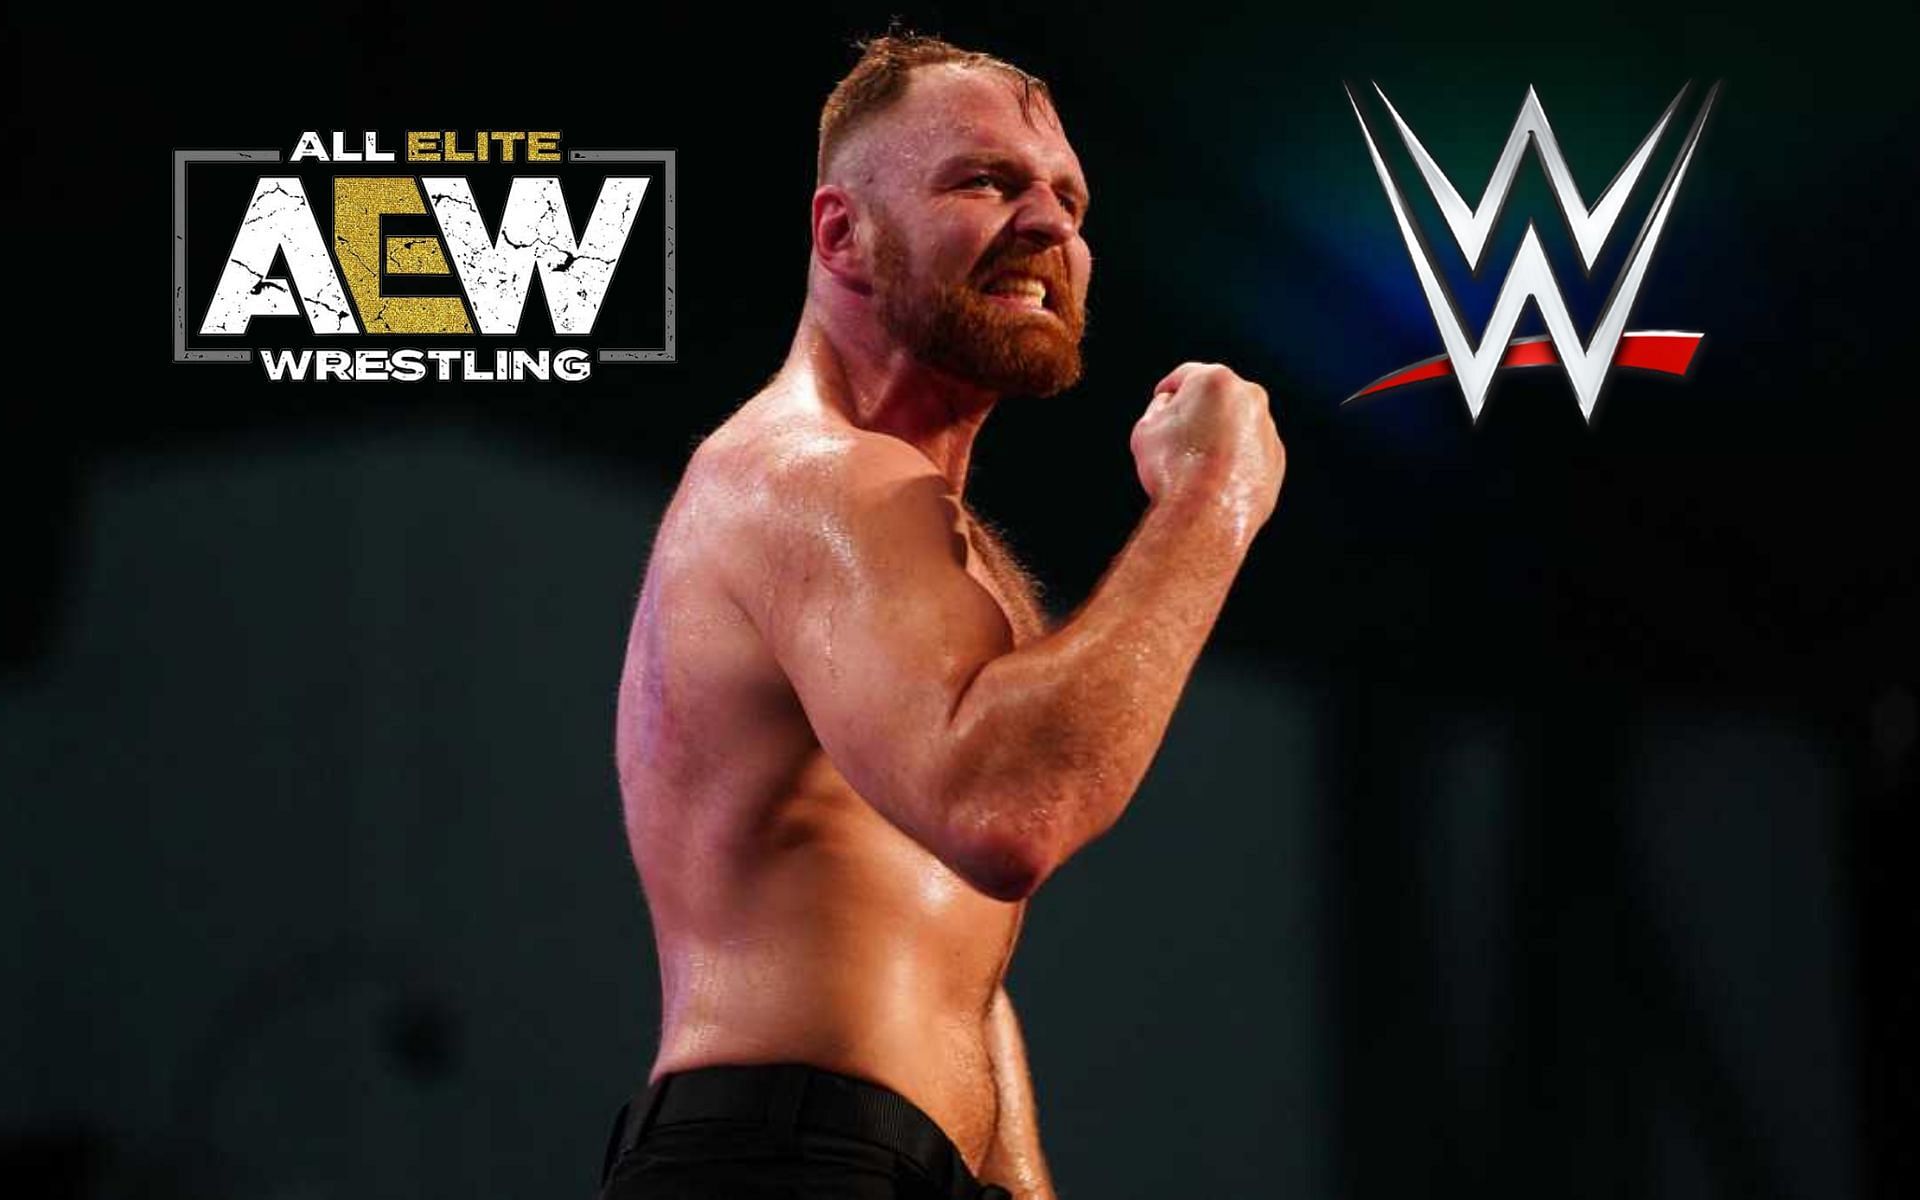 AEW World Champion Jon Moxley often draws comparisons to this WWE Hall of Famer.